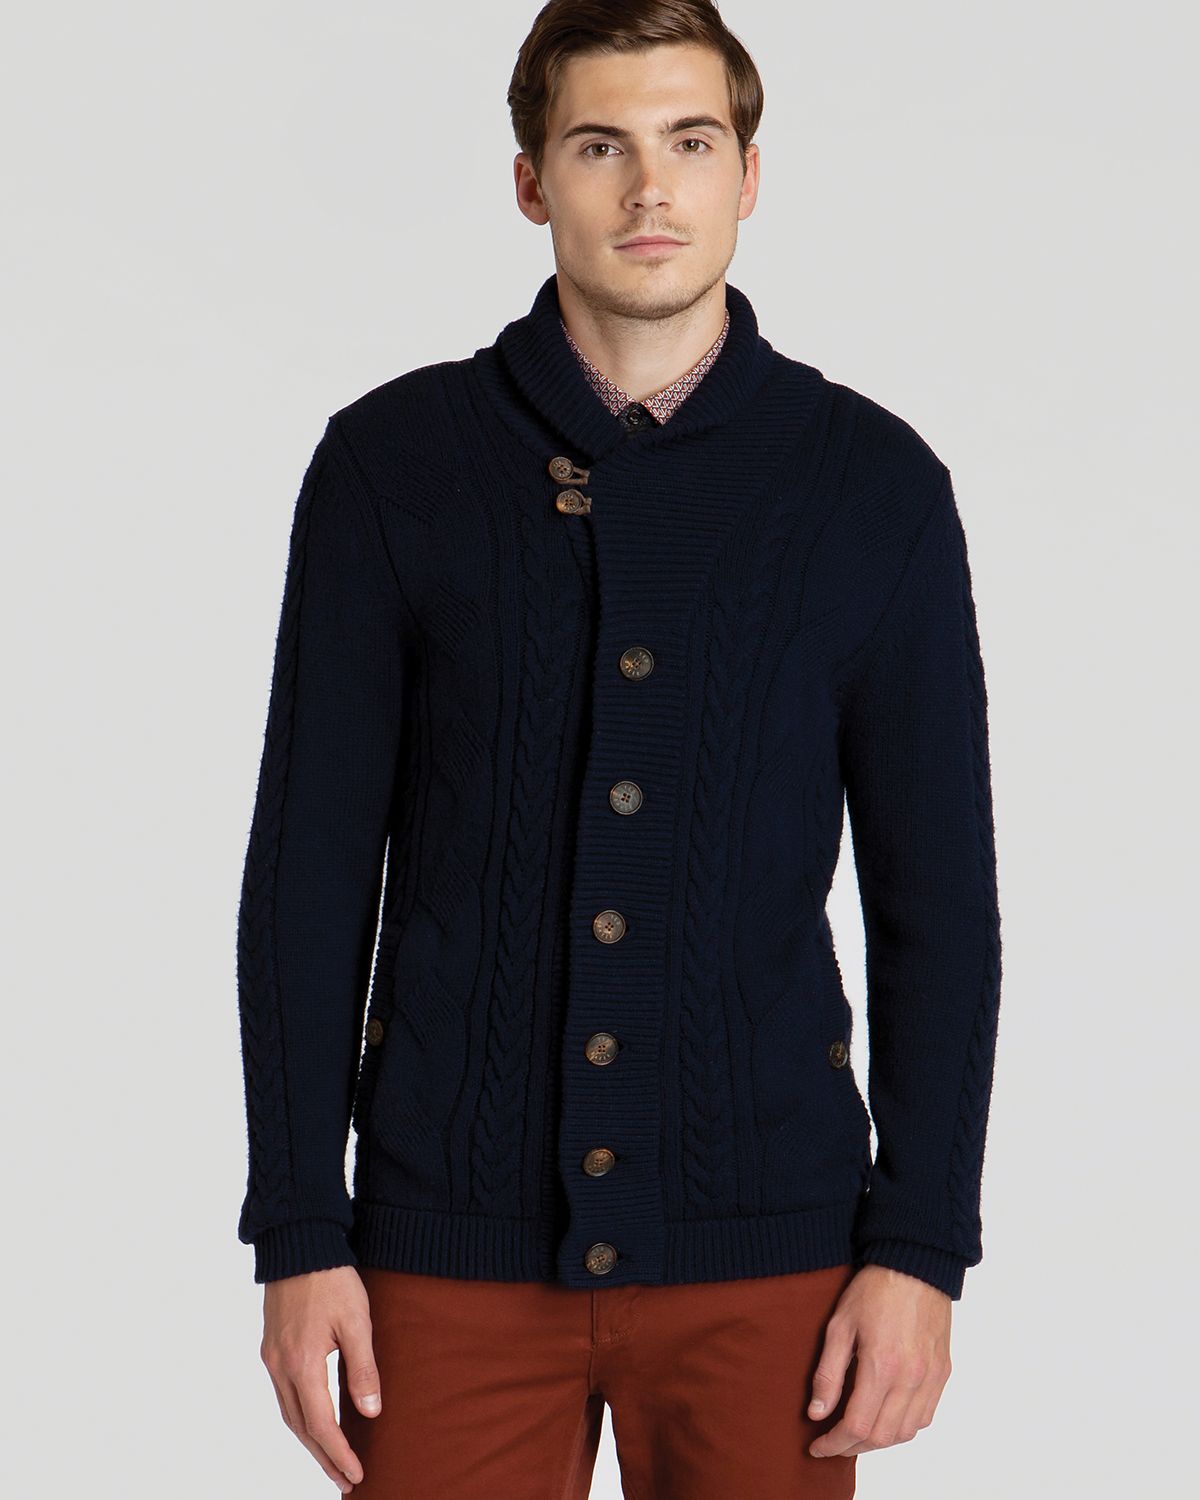 Lyst - Ted baker Jowalk Cable Knit Cardigan in Blue for Men